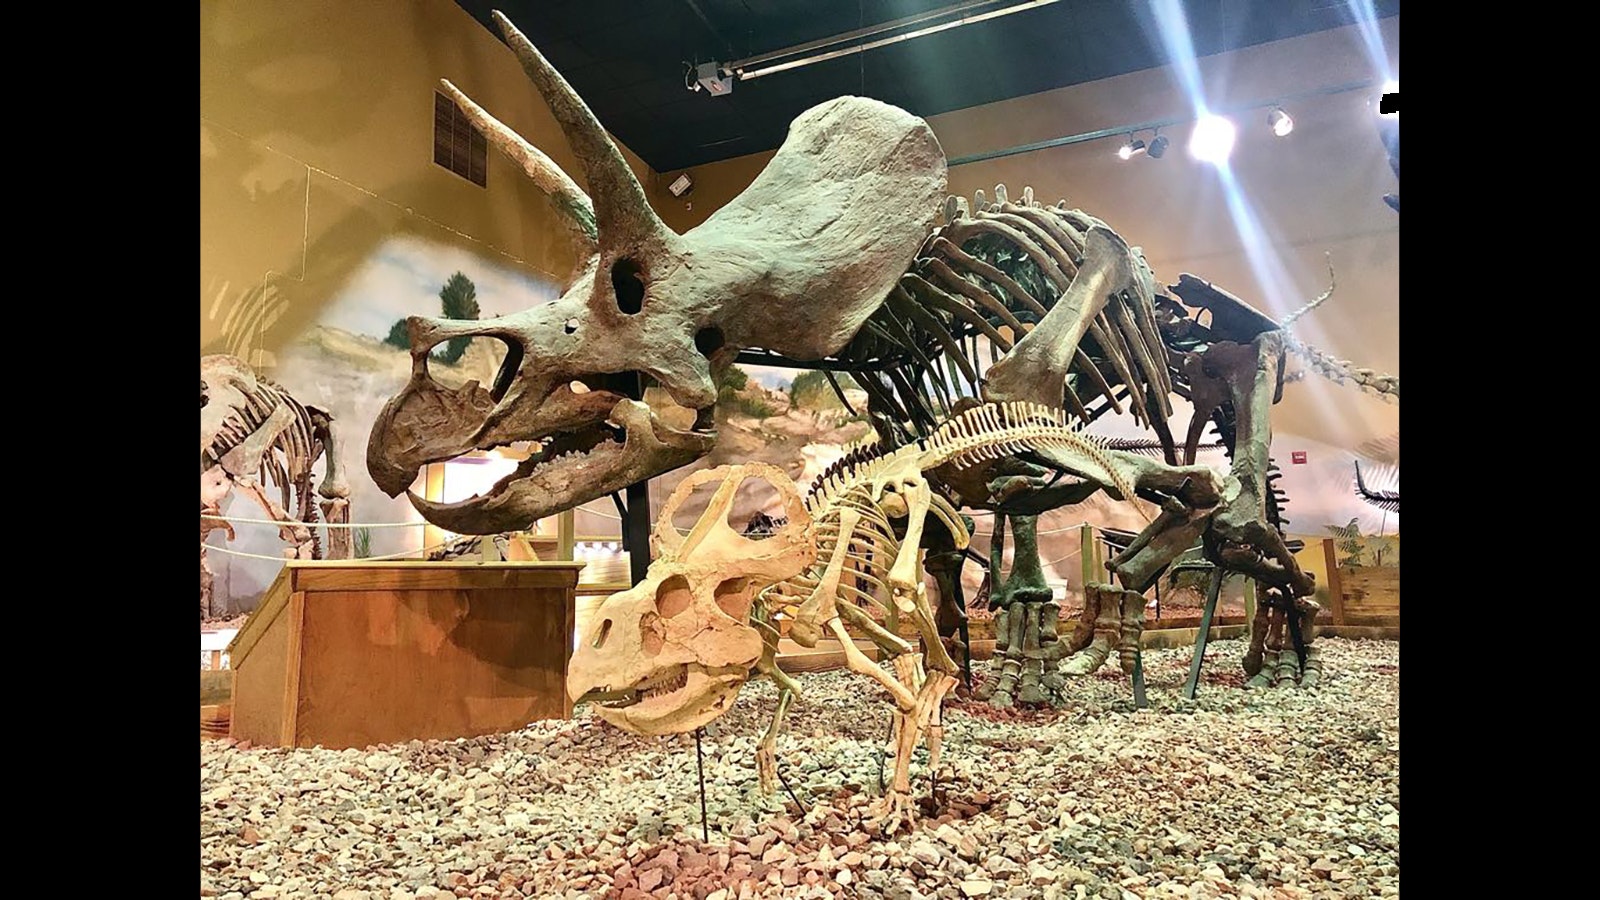 The Triceratops specimen displayed at the Wyoming Dinosaur Center in Thermopolis. This was the first real-fossil skeleton of Triceratops ever displayed in Wyoming in 1994, the same year Triceratops was recognized as the official state dinosaur.